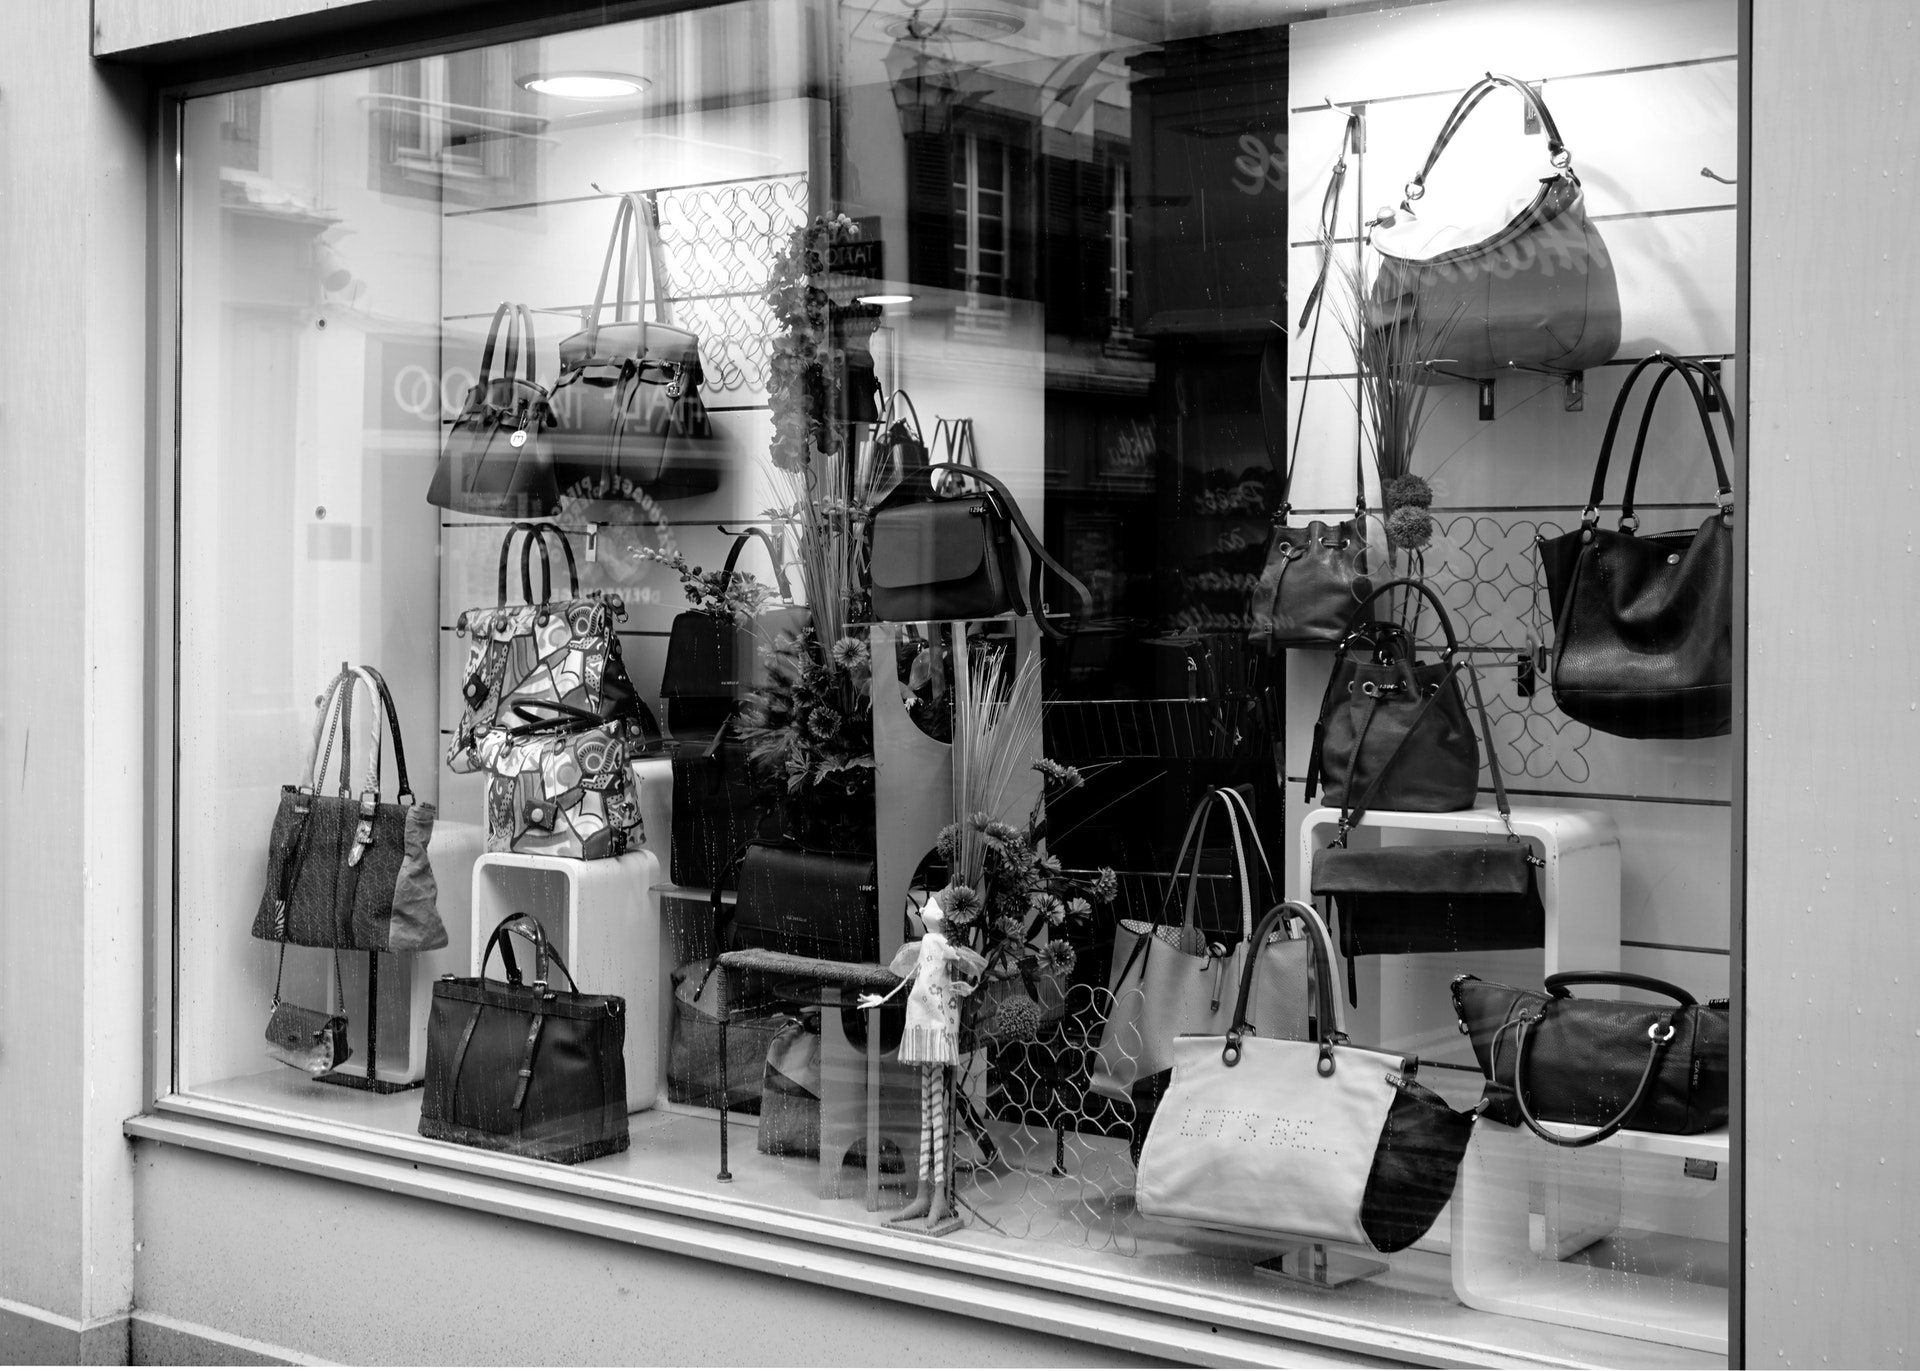 purses handing in the window of a retail store